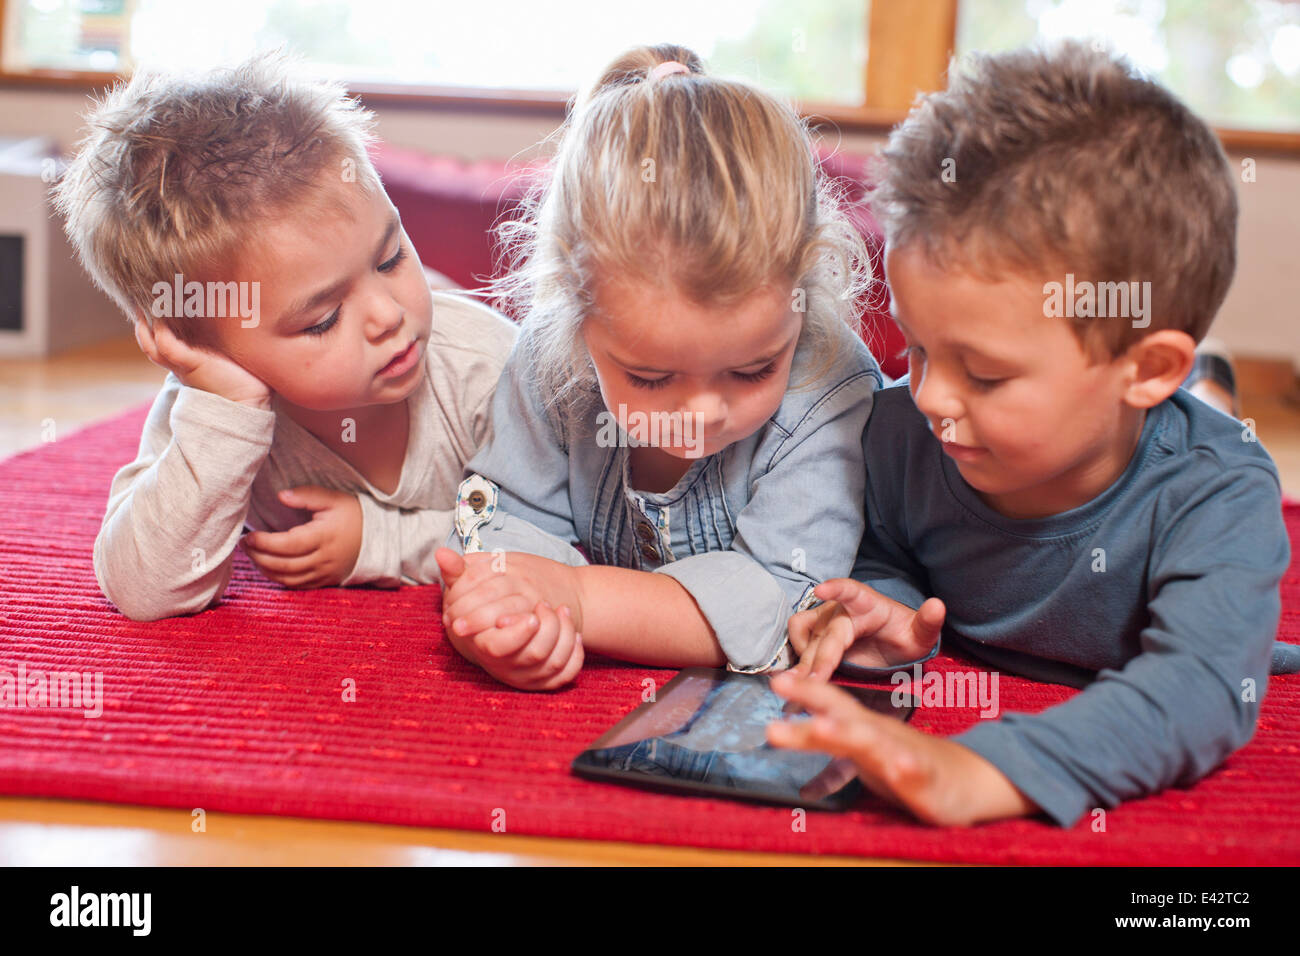 Two boys and a girl using digital tablet at nursery school Stock Photo